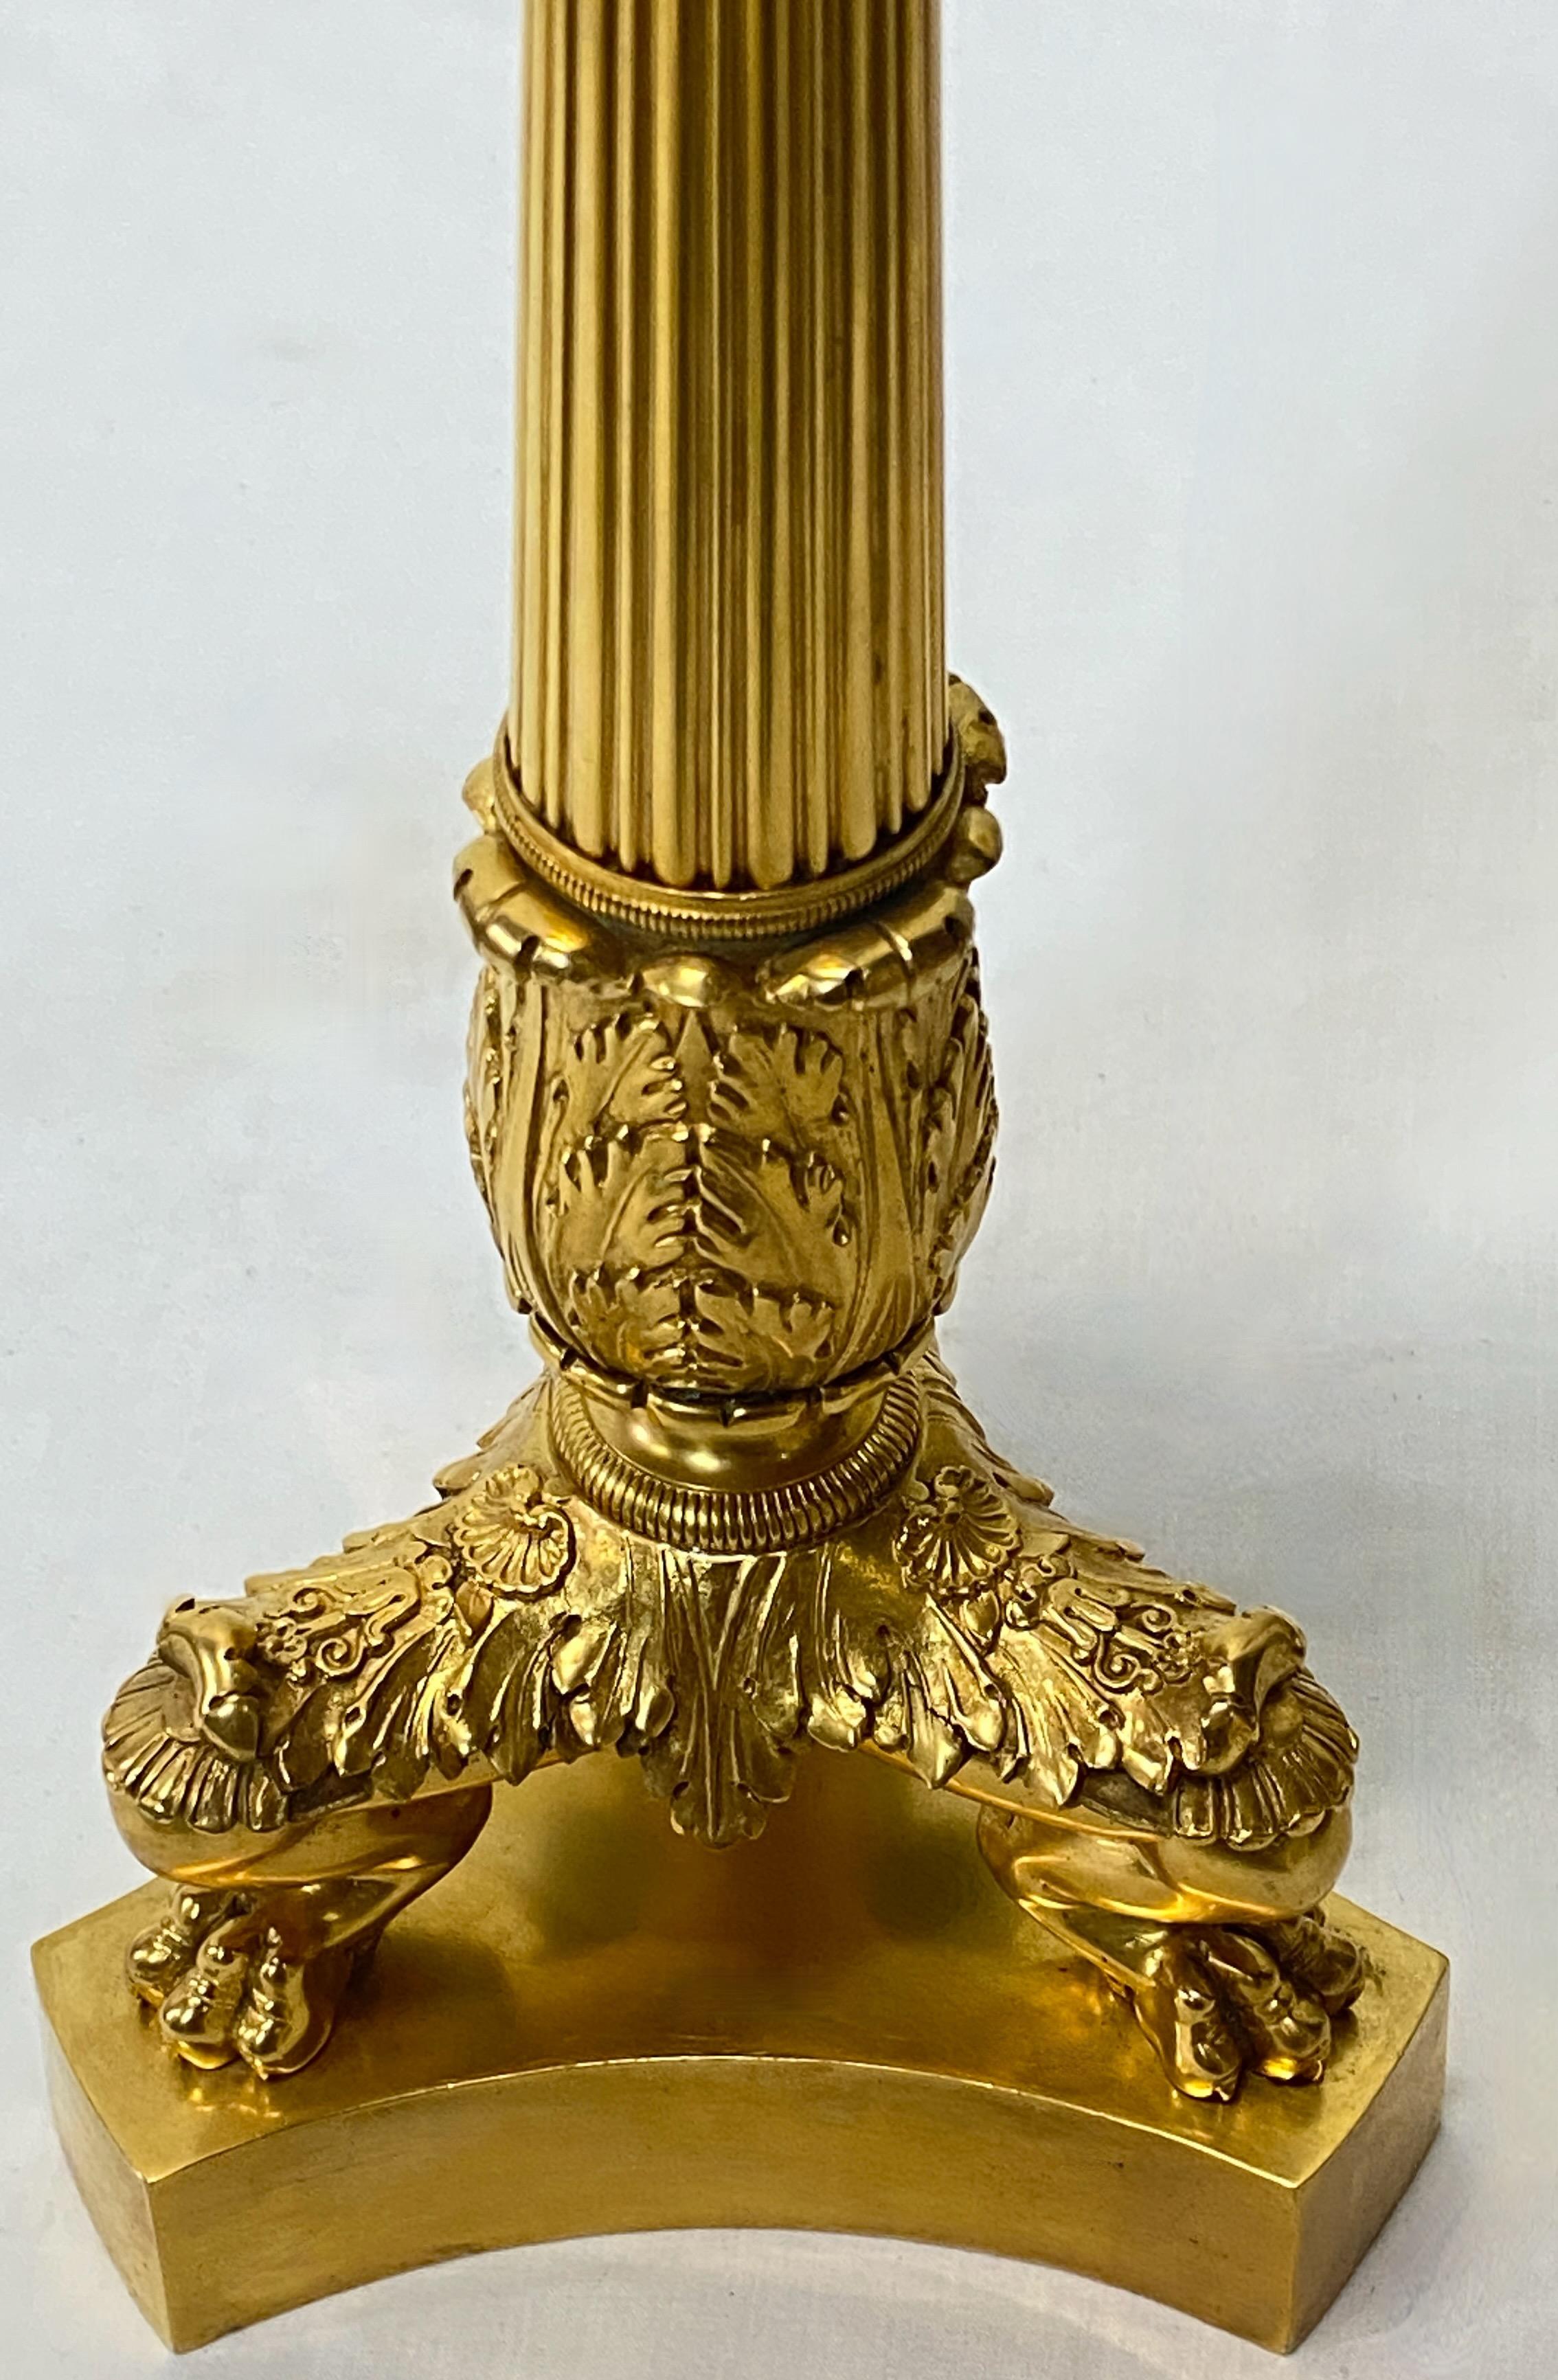 Pair of Early to Mid-19th Century French Empire Gilt Bronze Candlesticks For Sale 2